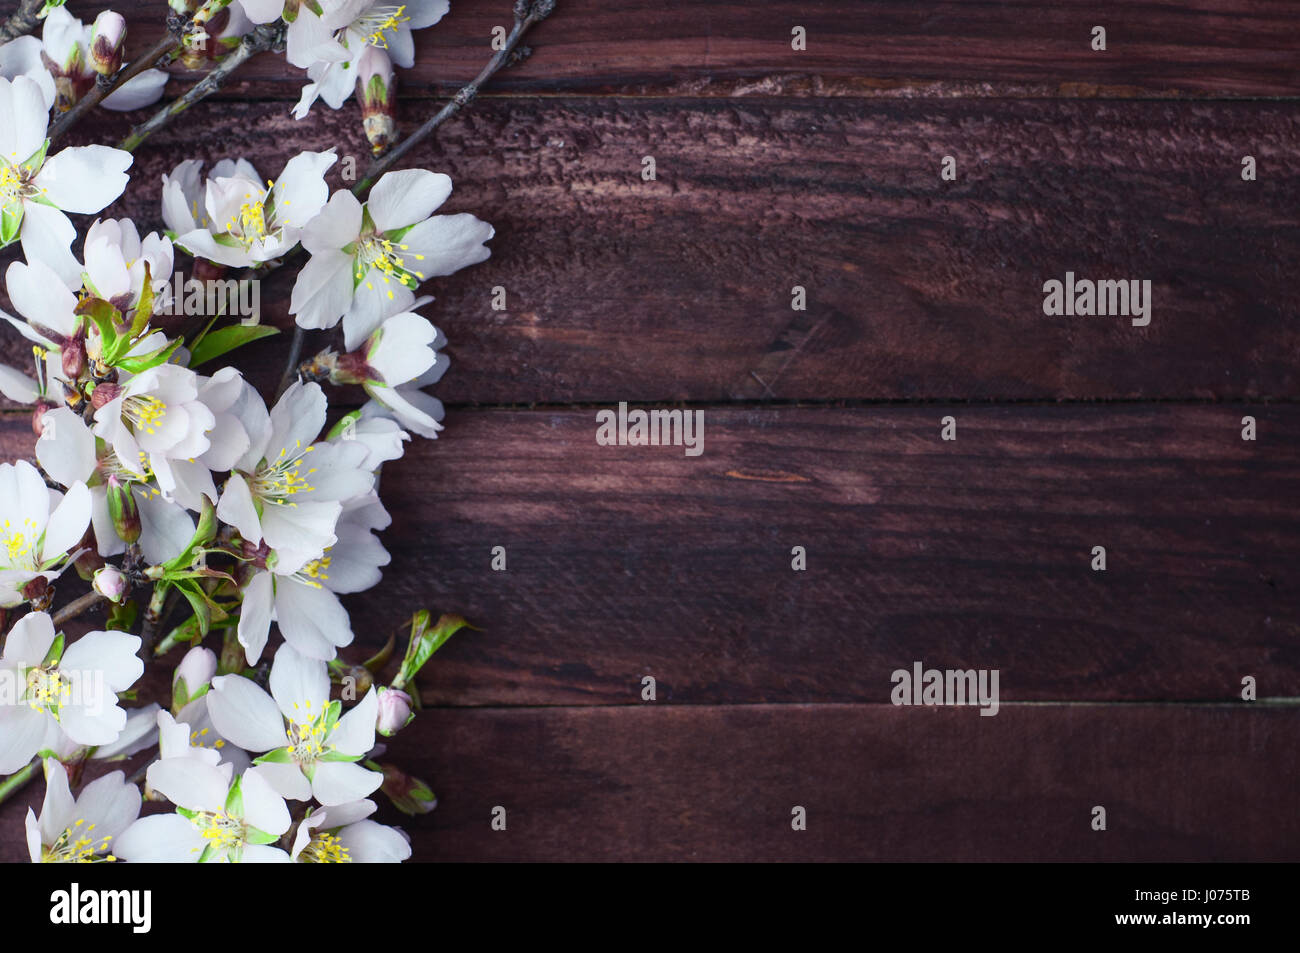 Branch with almond blossoms on a brown wooden surface, empty space on the right Stock Photo